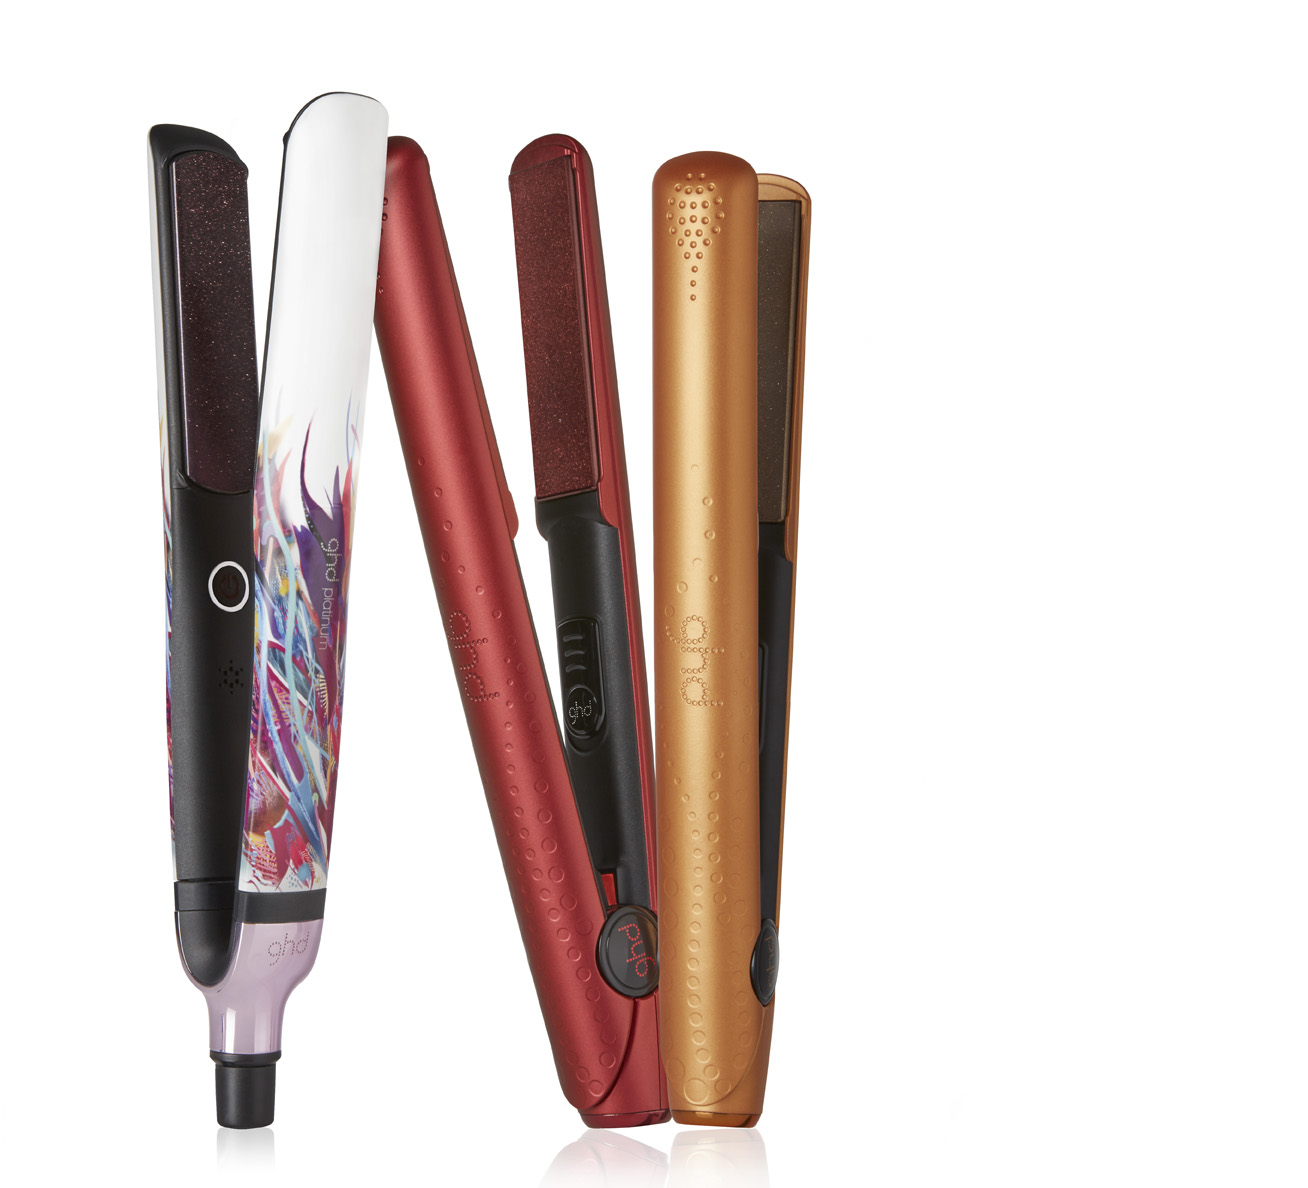 Ghd Platinum Professional Styler Tropic Sky Limited Edition 